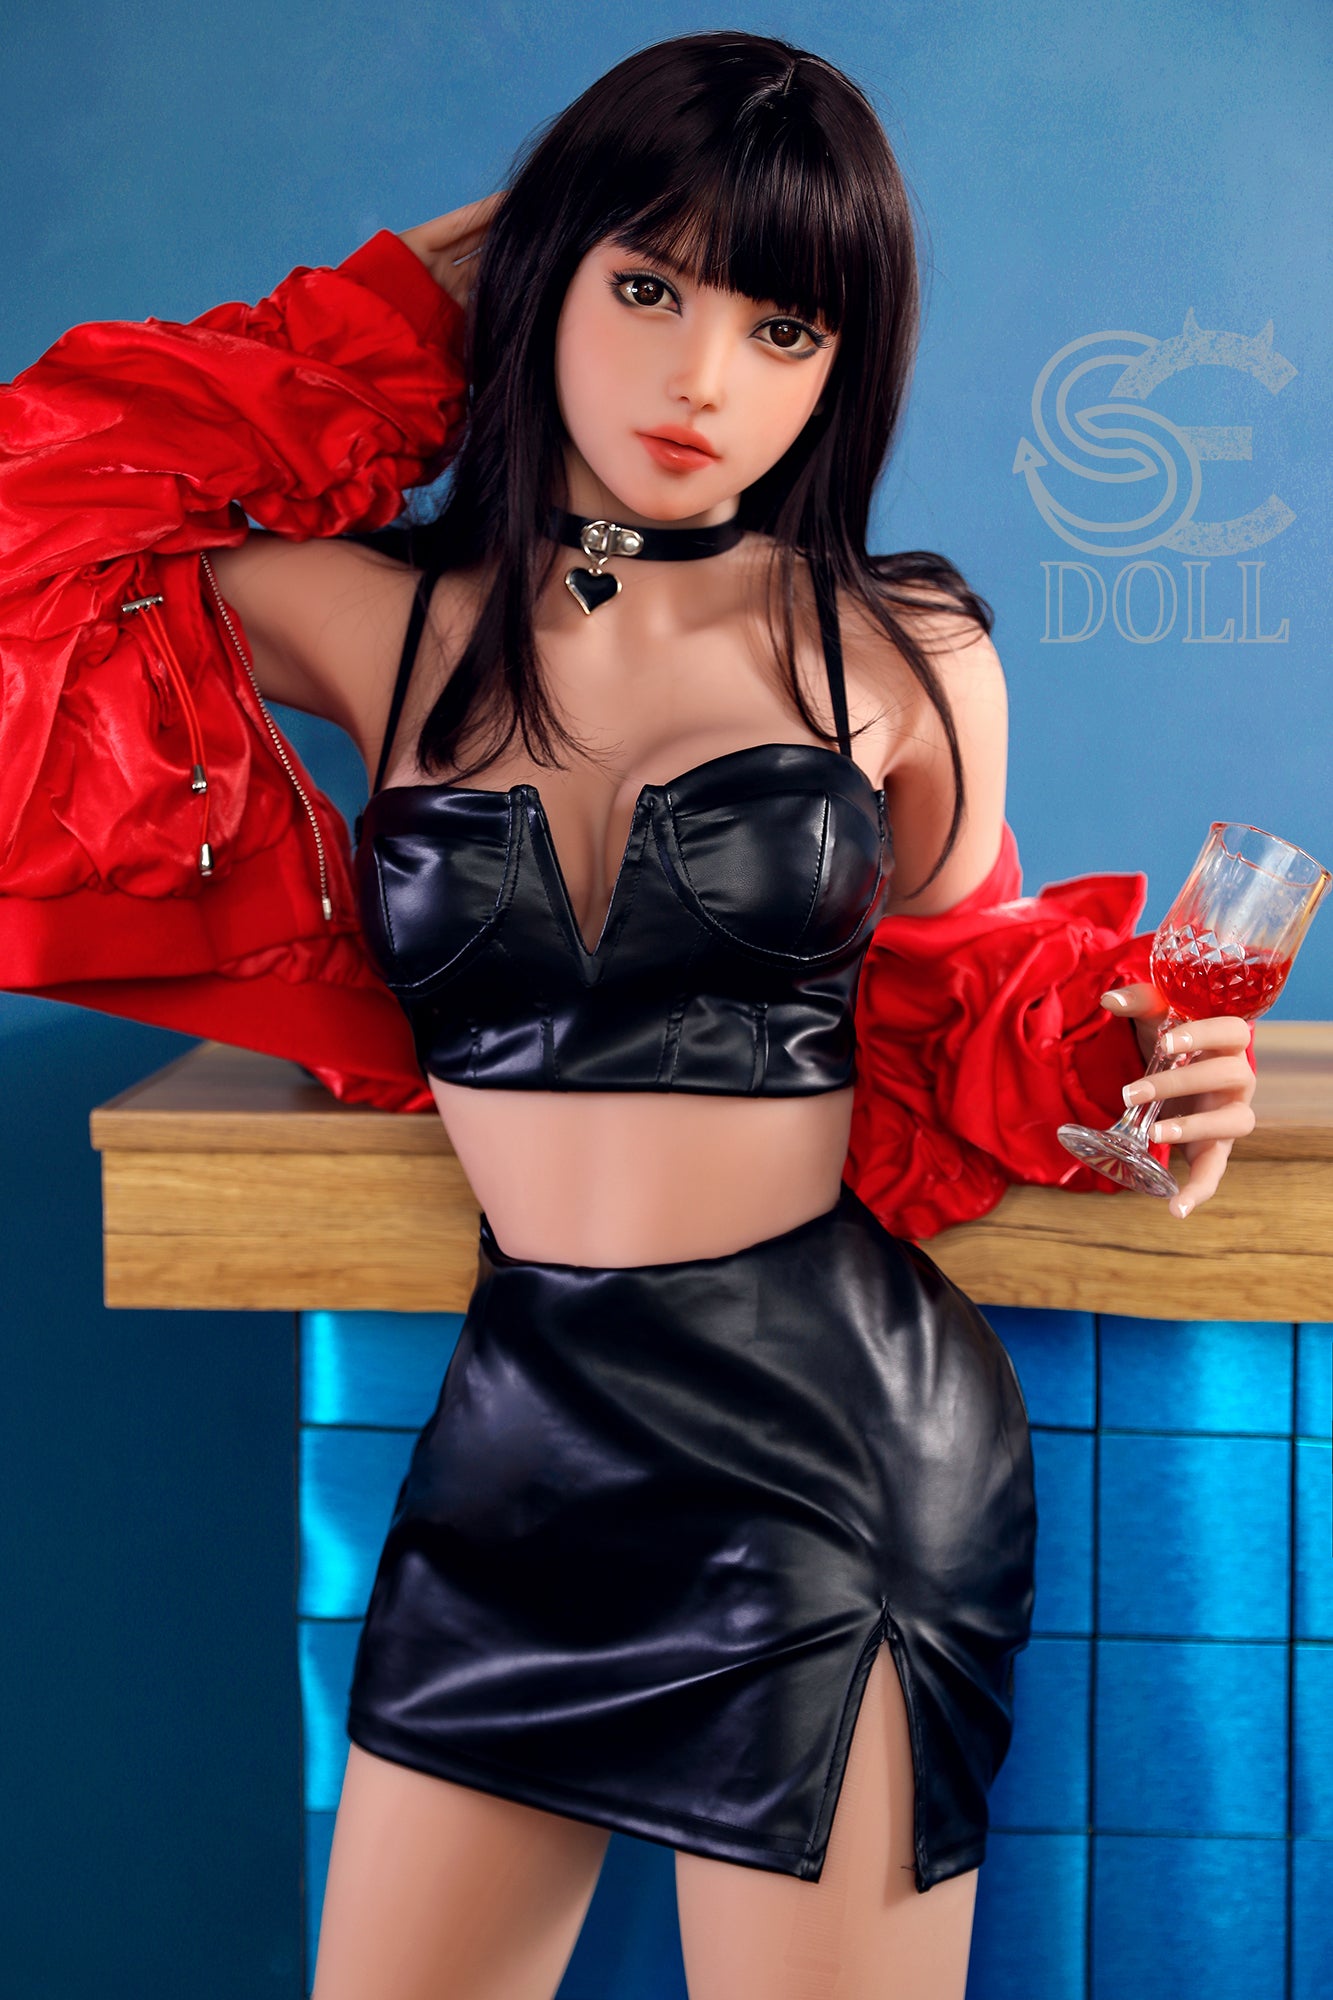 SEDOLL 158 cm D TPE - Coral | Buy Sex Dolls at DOLLS ACTUALLY